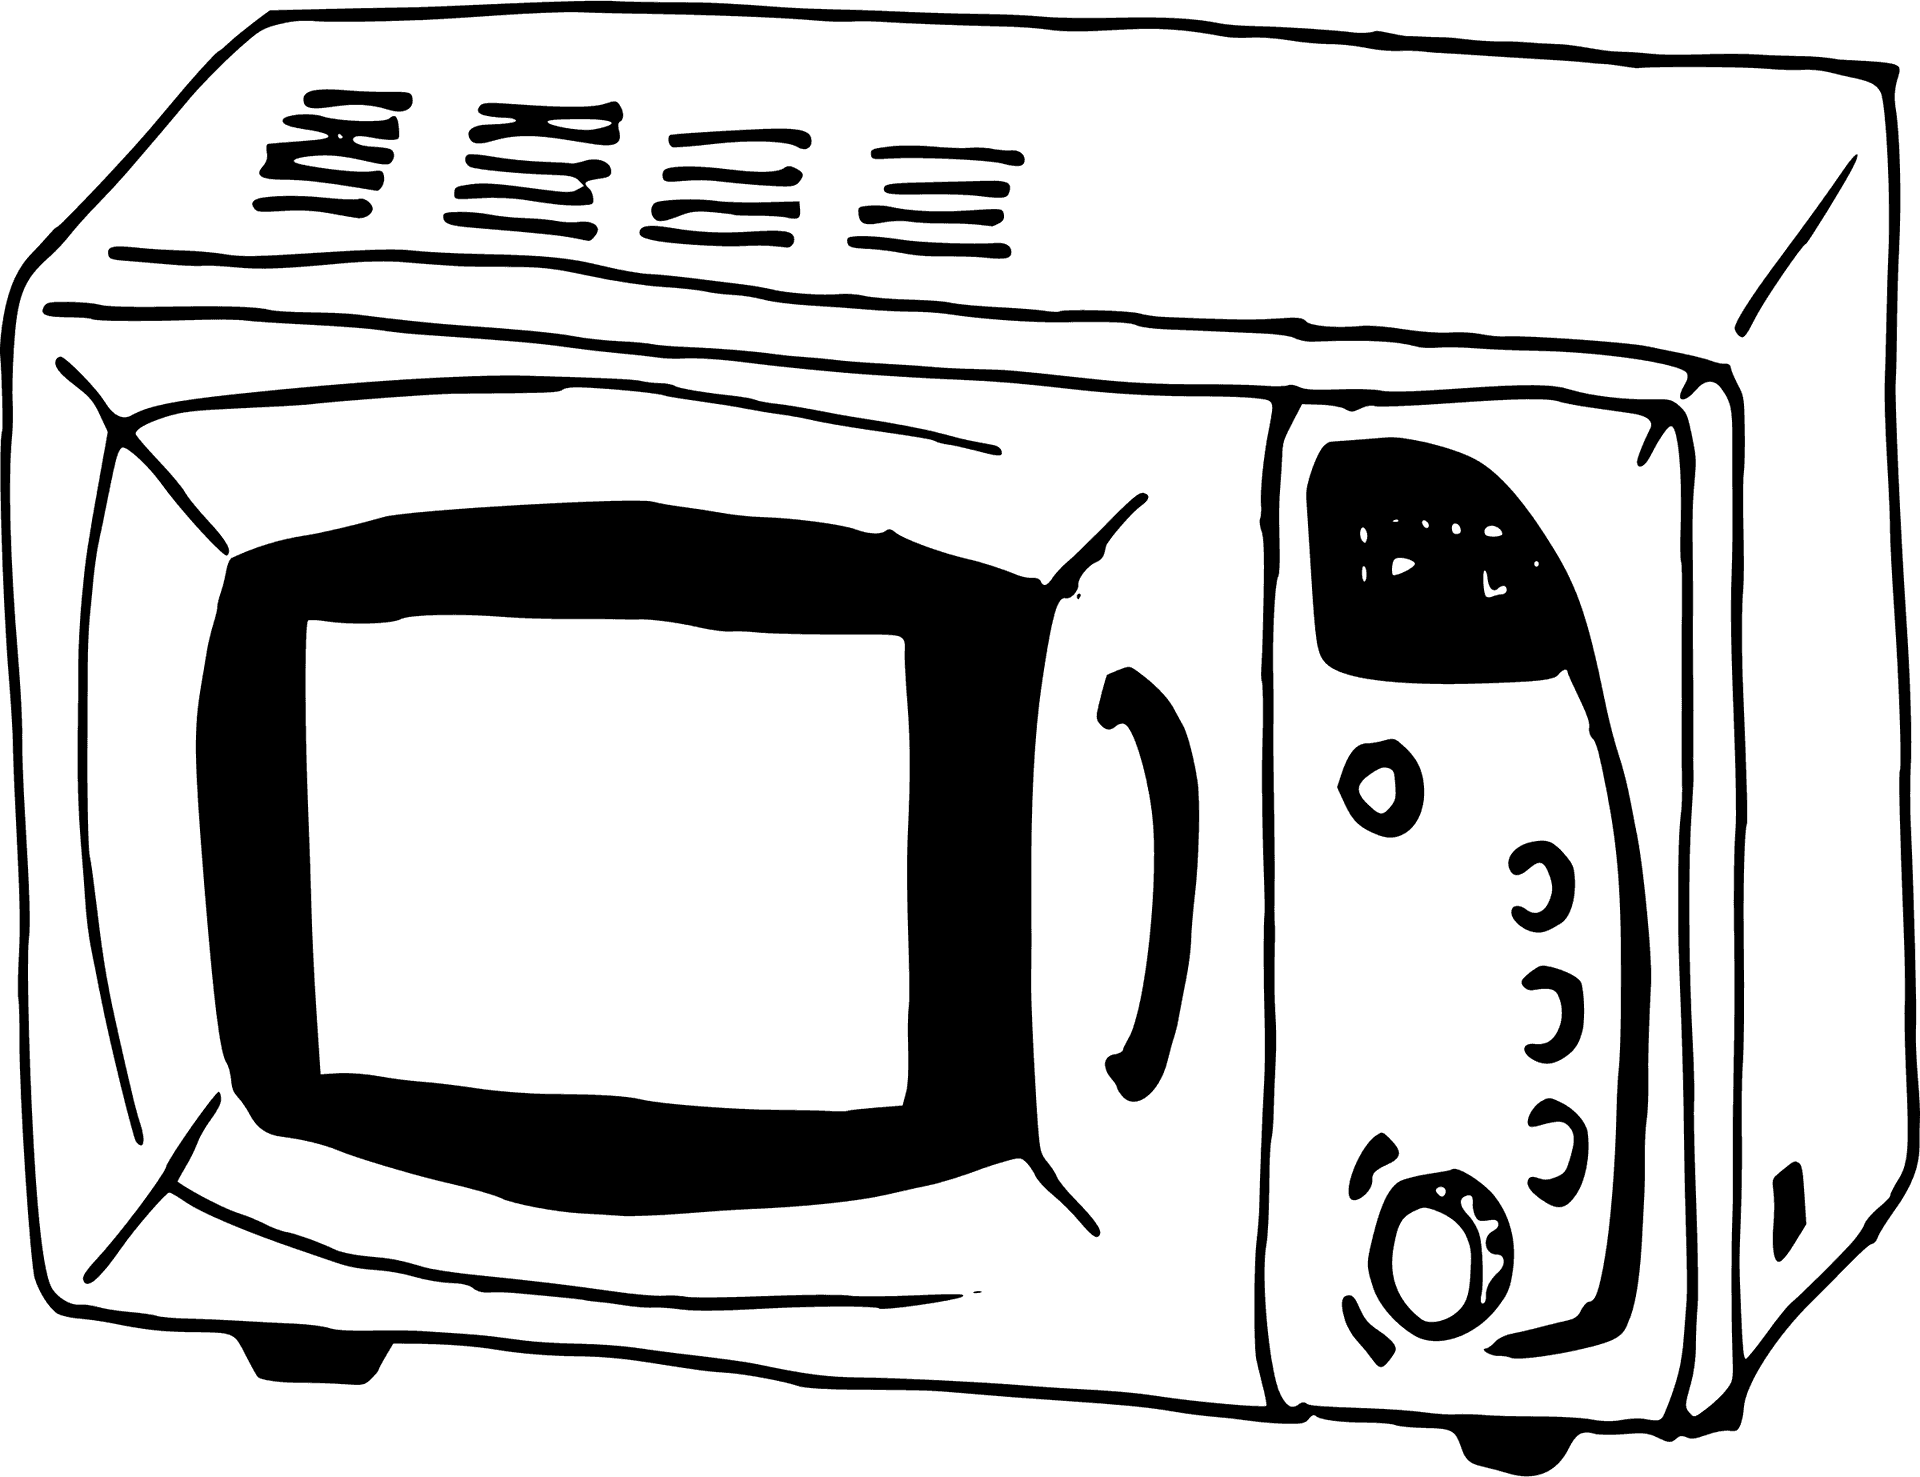 Microwave Oven Sketch.png PNG image